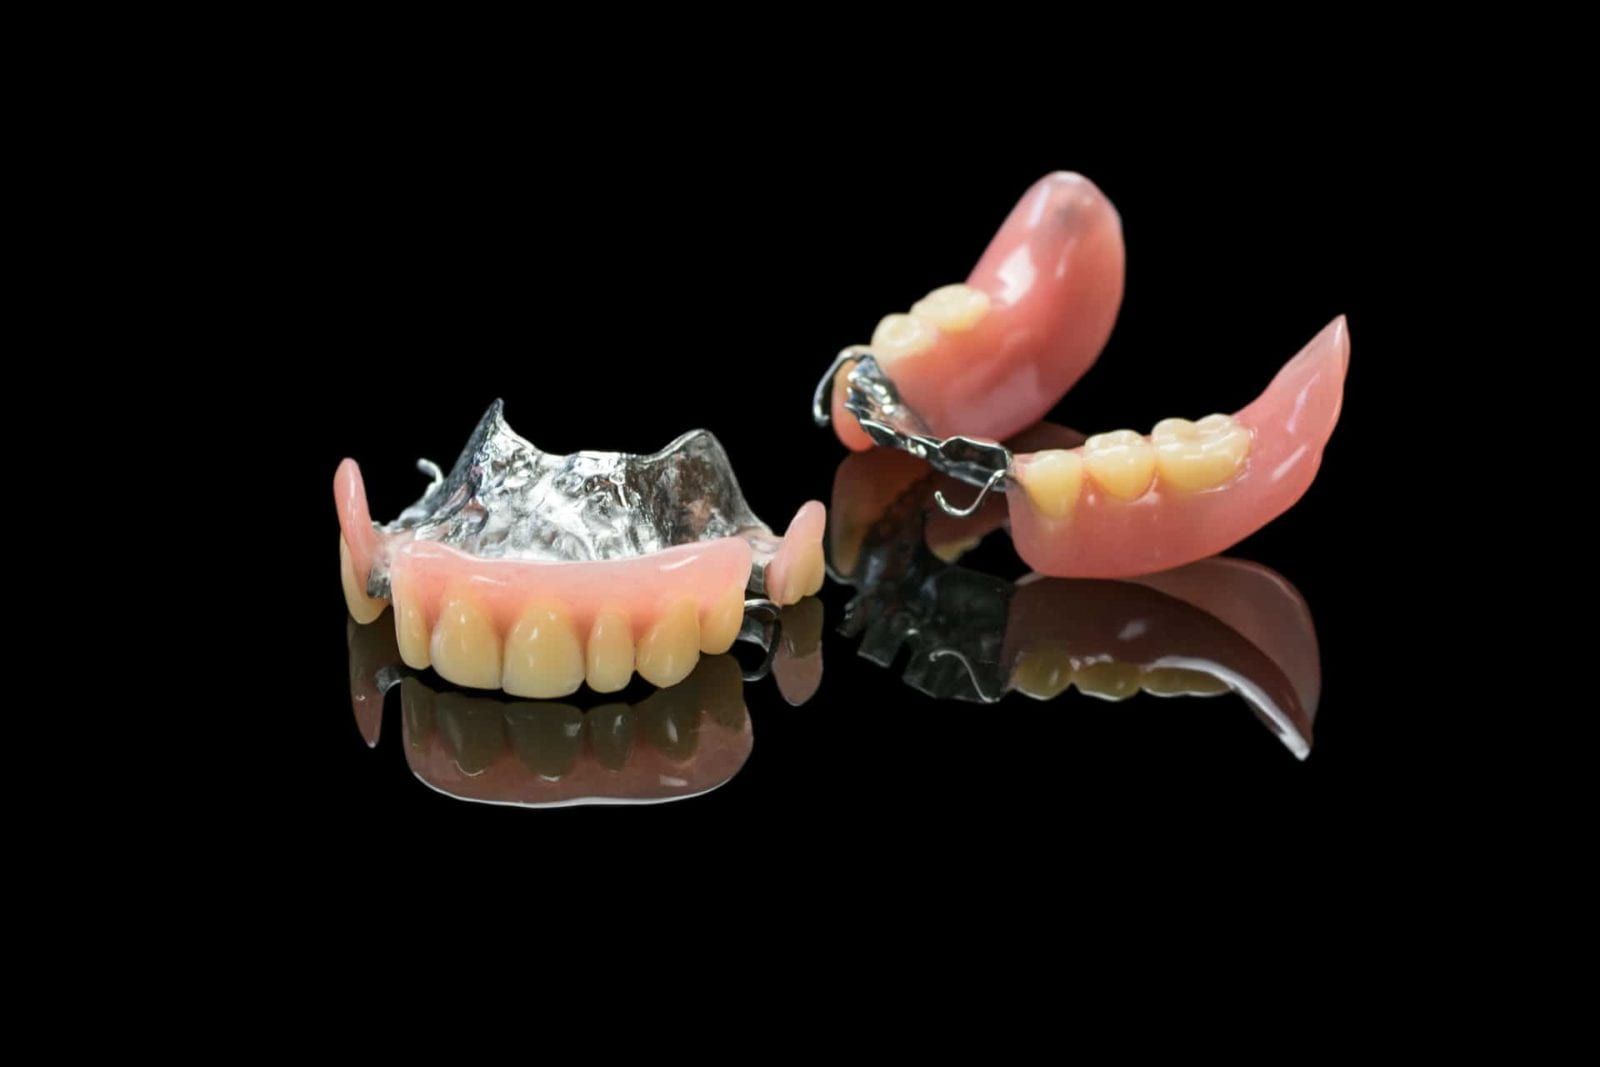 partial dentures set on isolated background